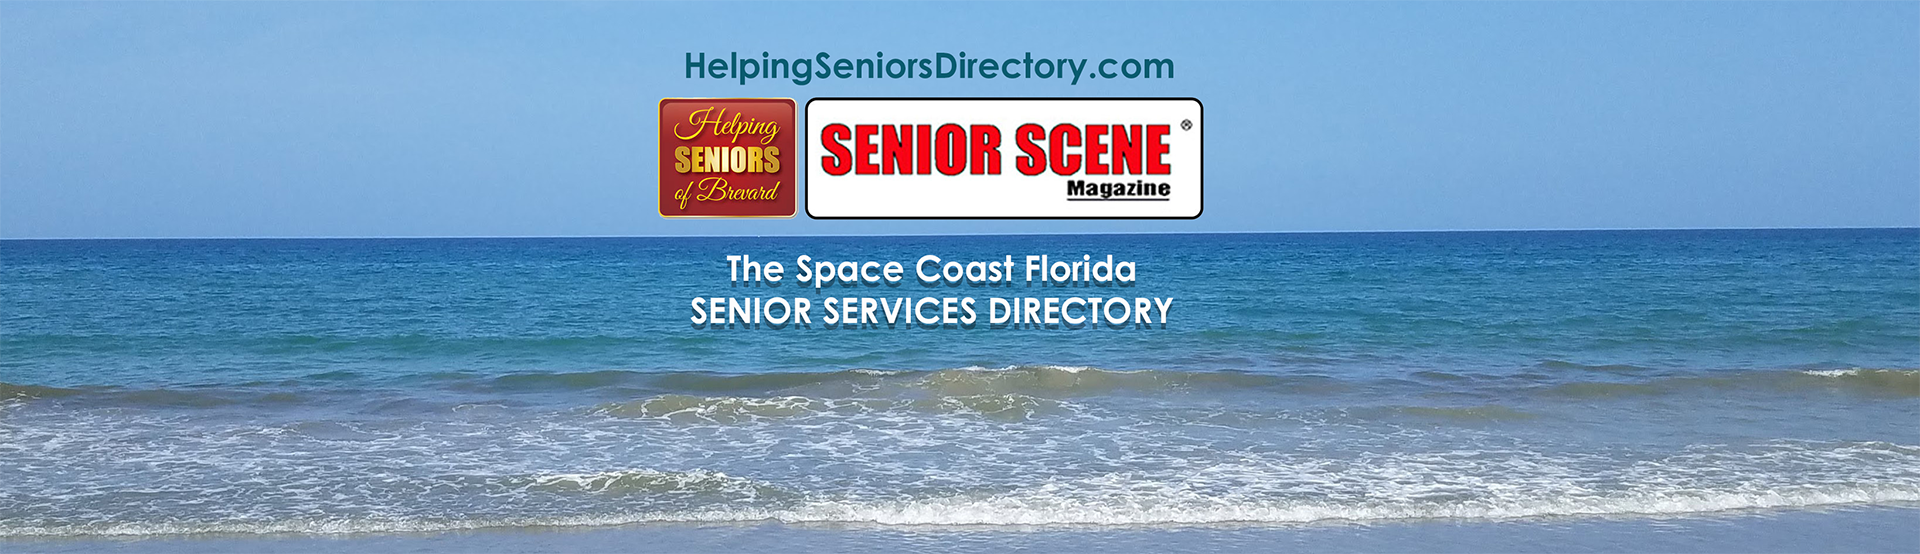 Helping Seniors Services Directory